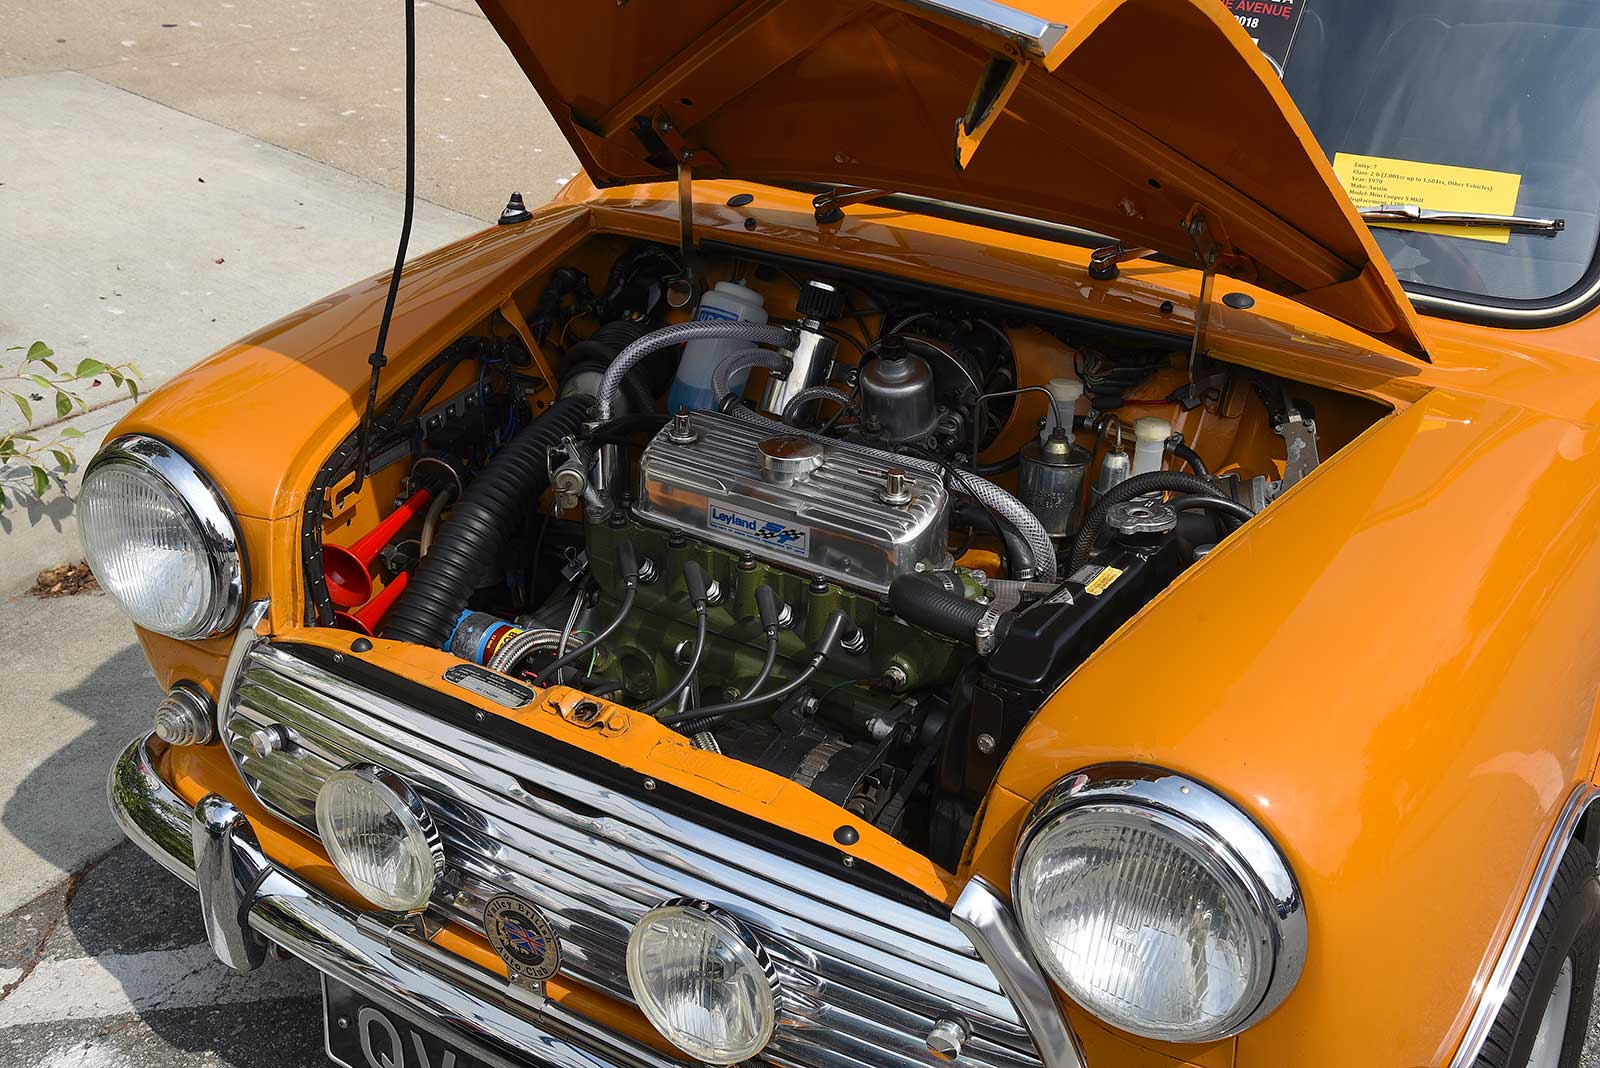 Classic & Sports Car – Rare and unusual classics centre stage at the Little Car Show